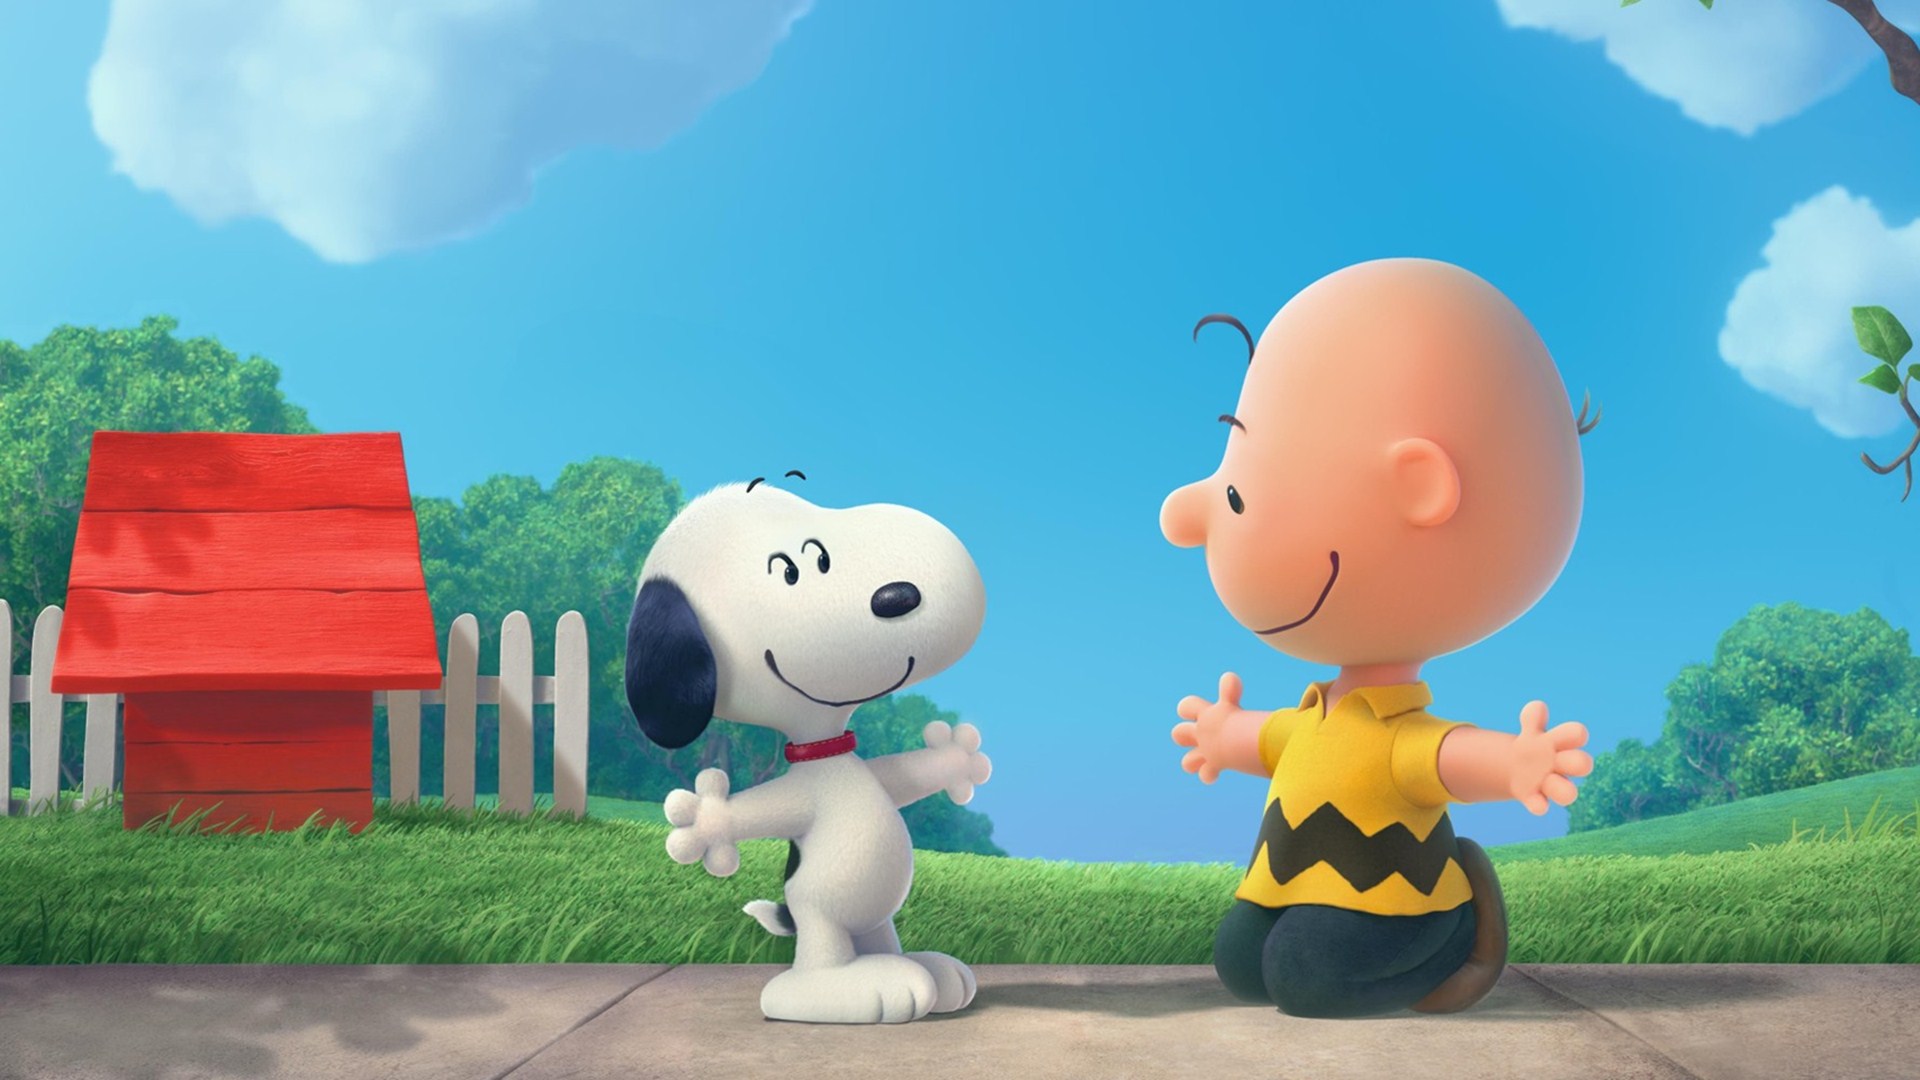 Snoopy And Charlie Brown The Peanuts Cartoon HD Wallpaper